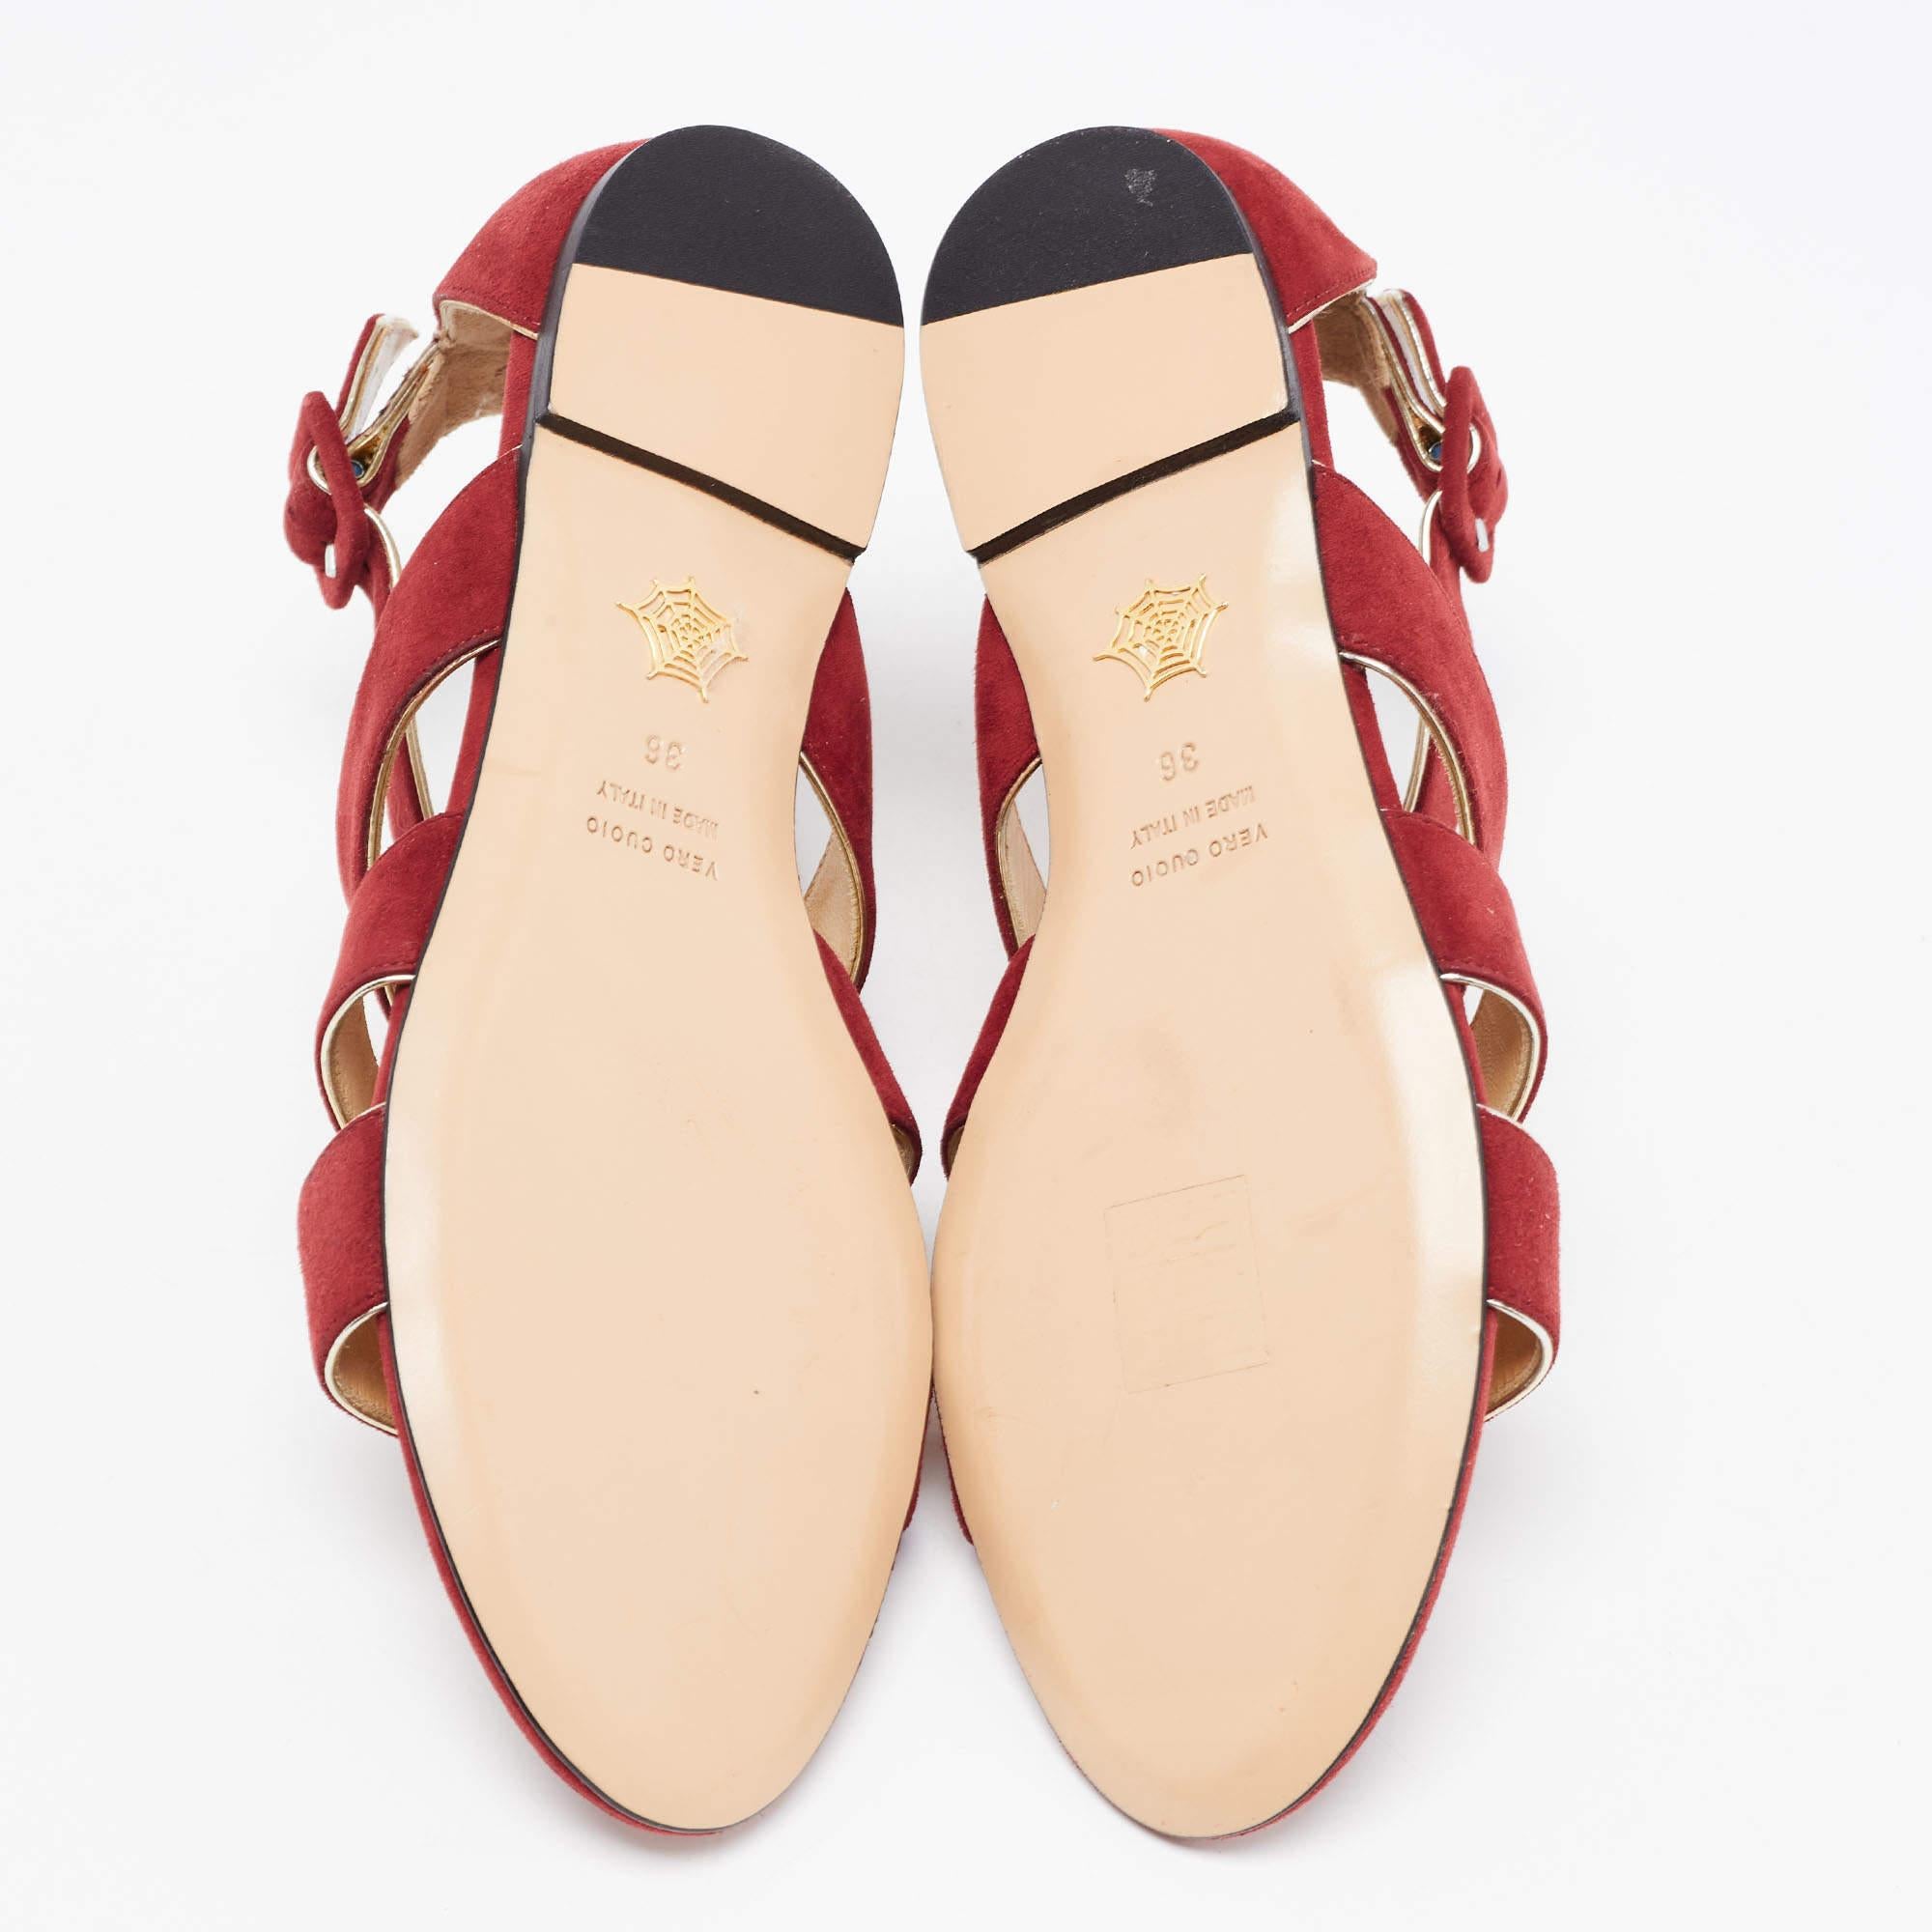 Charlotte Olympia Garnet Red Suede One More Kiss Flat Flat Sandals Size 36 4